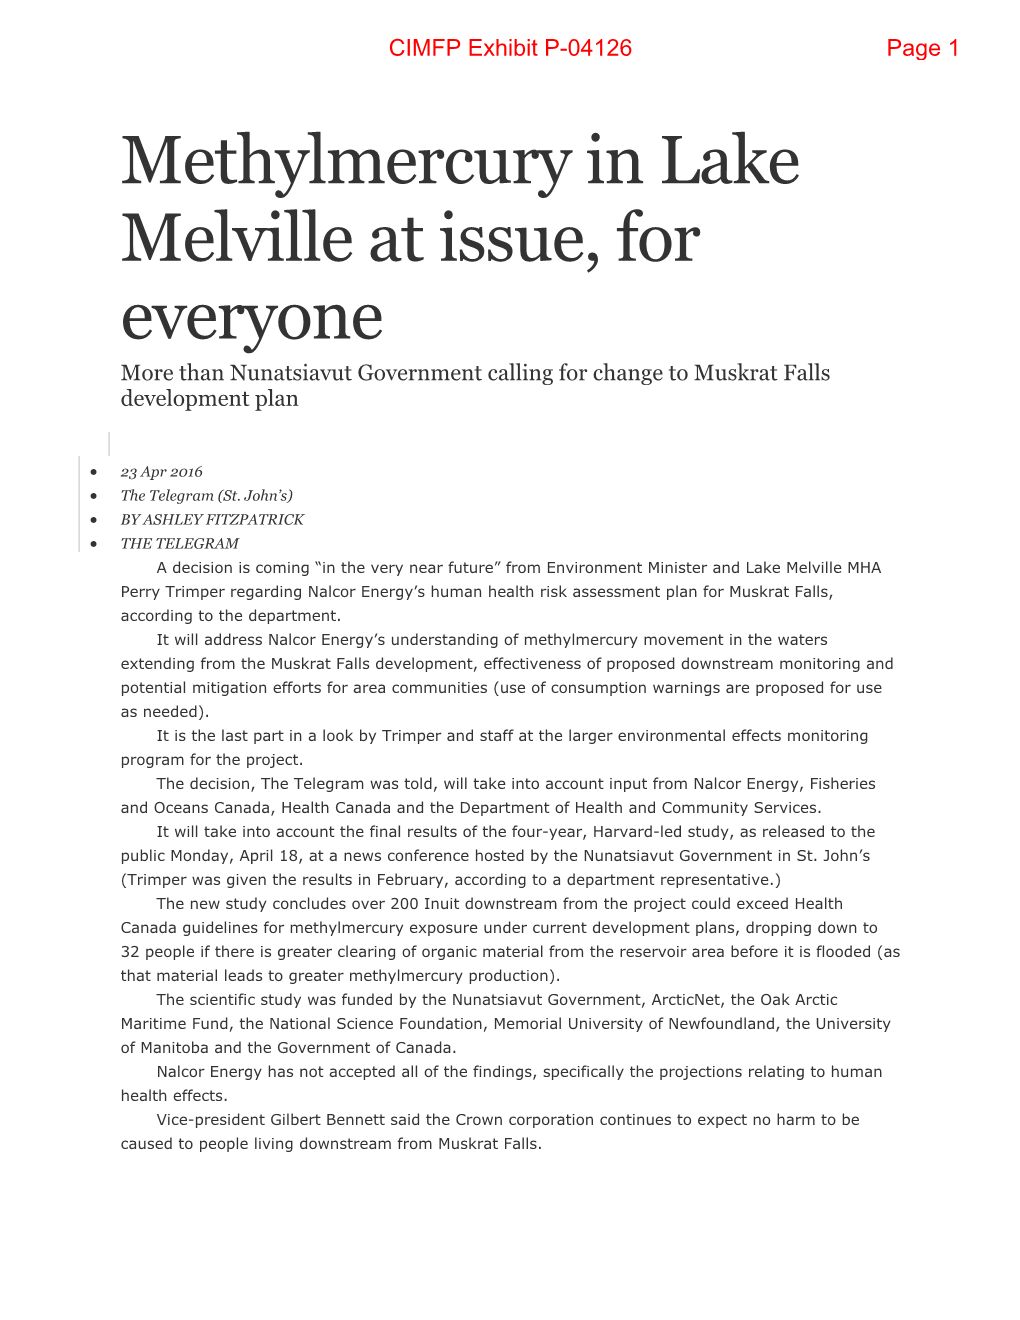 Methylmercury in Lake Melville at Issue, for Everyone More Than Nunatsiavut Government Calling for Change to Muskrat Falls Development Plan